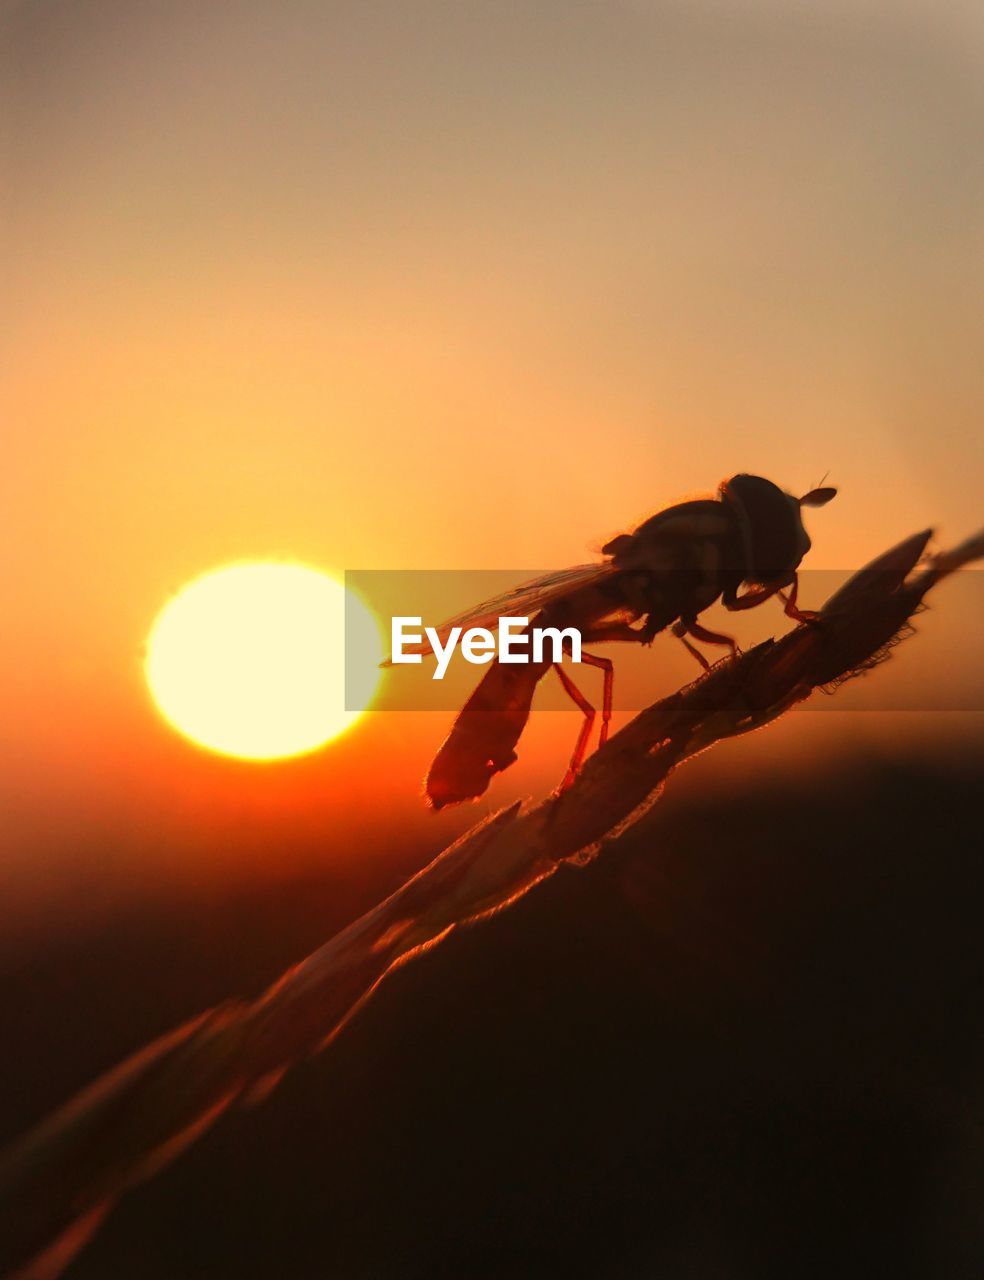 CLOSE-UP OF SILHOUETTE INSECT AGAINST SUNSET SKY